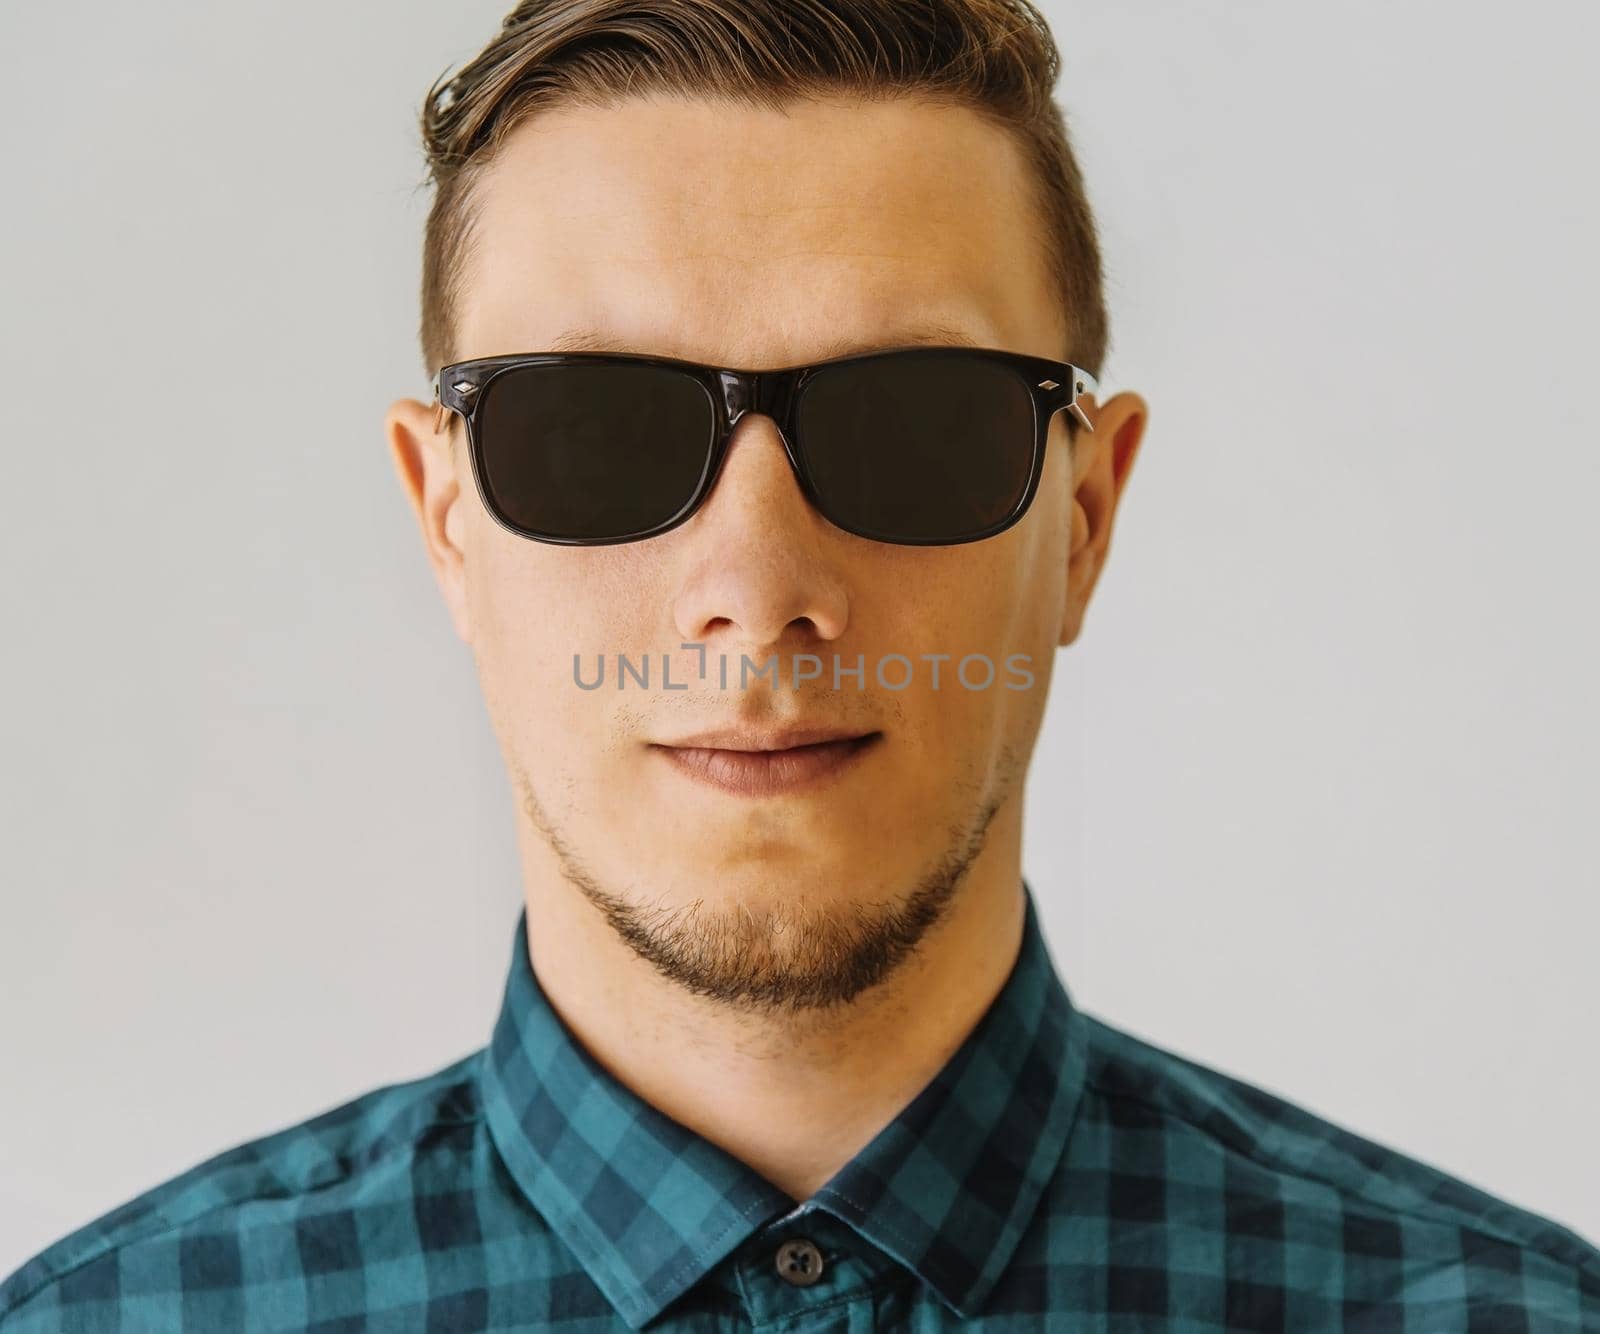 Portrait of handsome young brunet man in sunglasses and plaid shirt